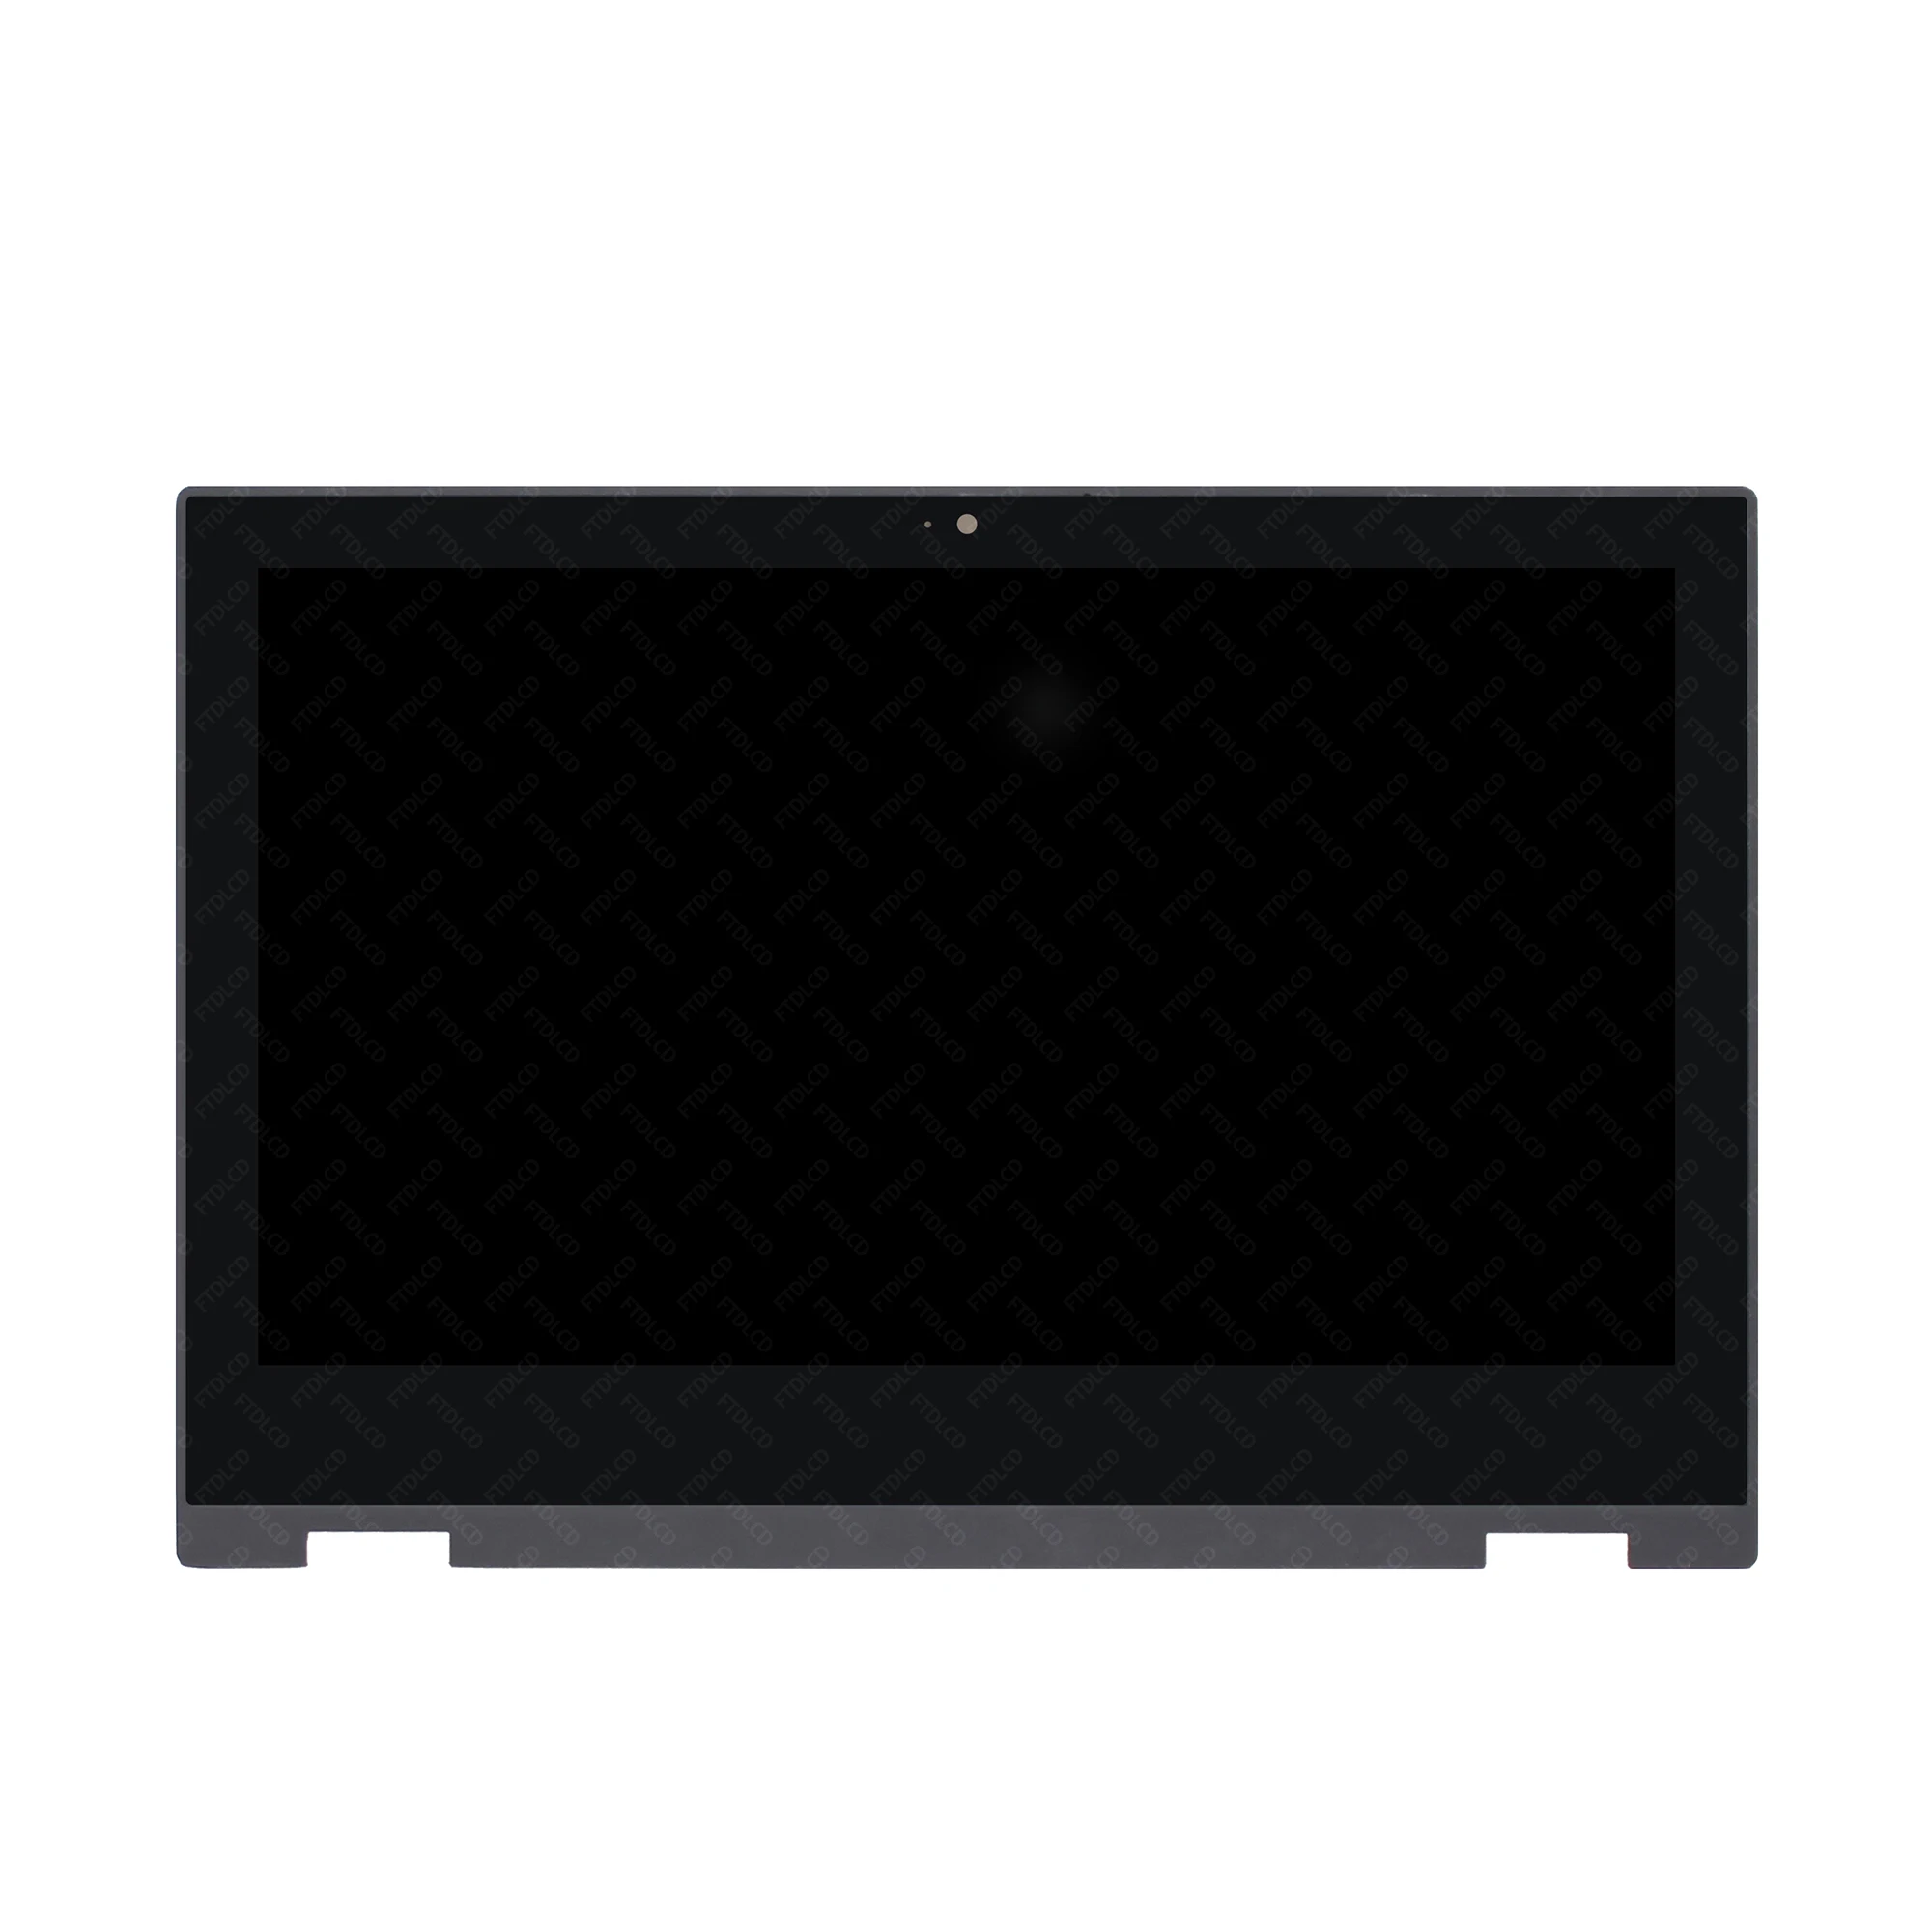 11.6'' Full HD IPS LCD Display Screen Touchscreen Digitizer Panel Matrix Assembly With Frame For Acer Spin 1 SP111-34 N17H2